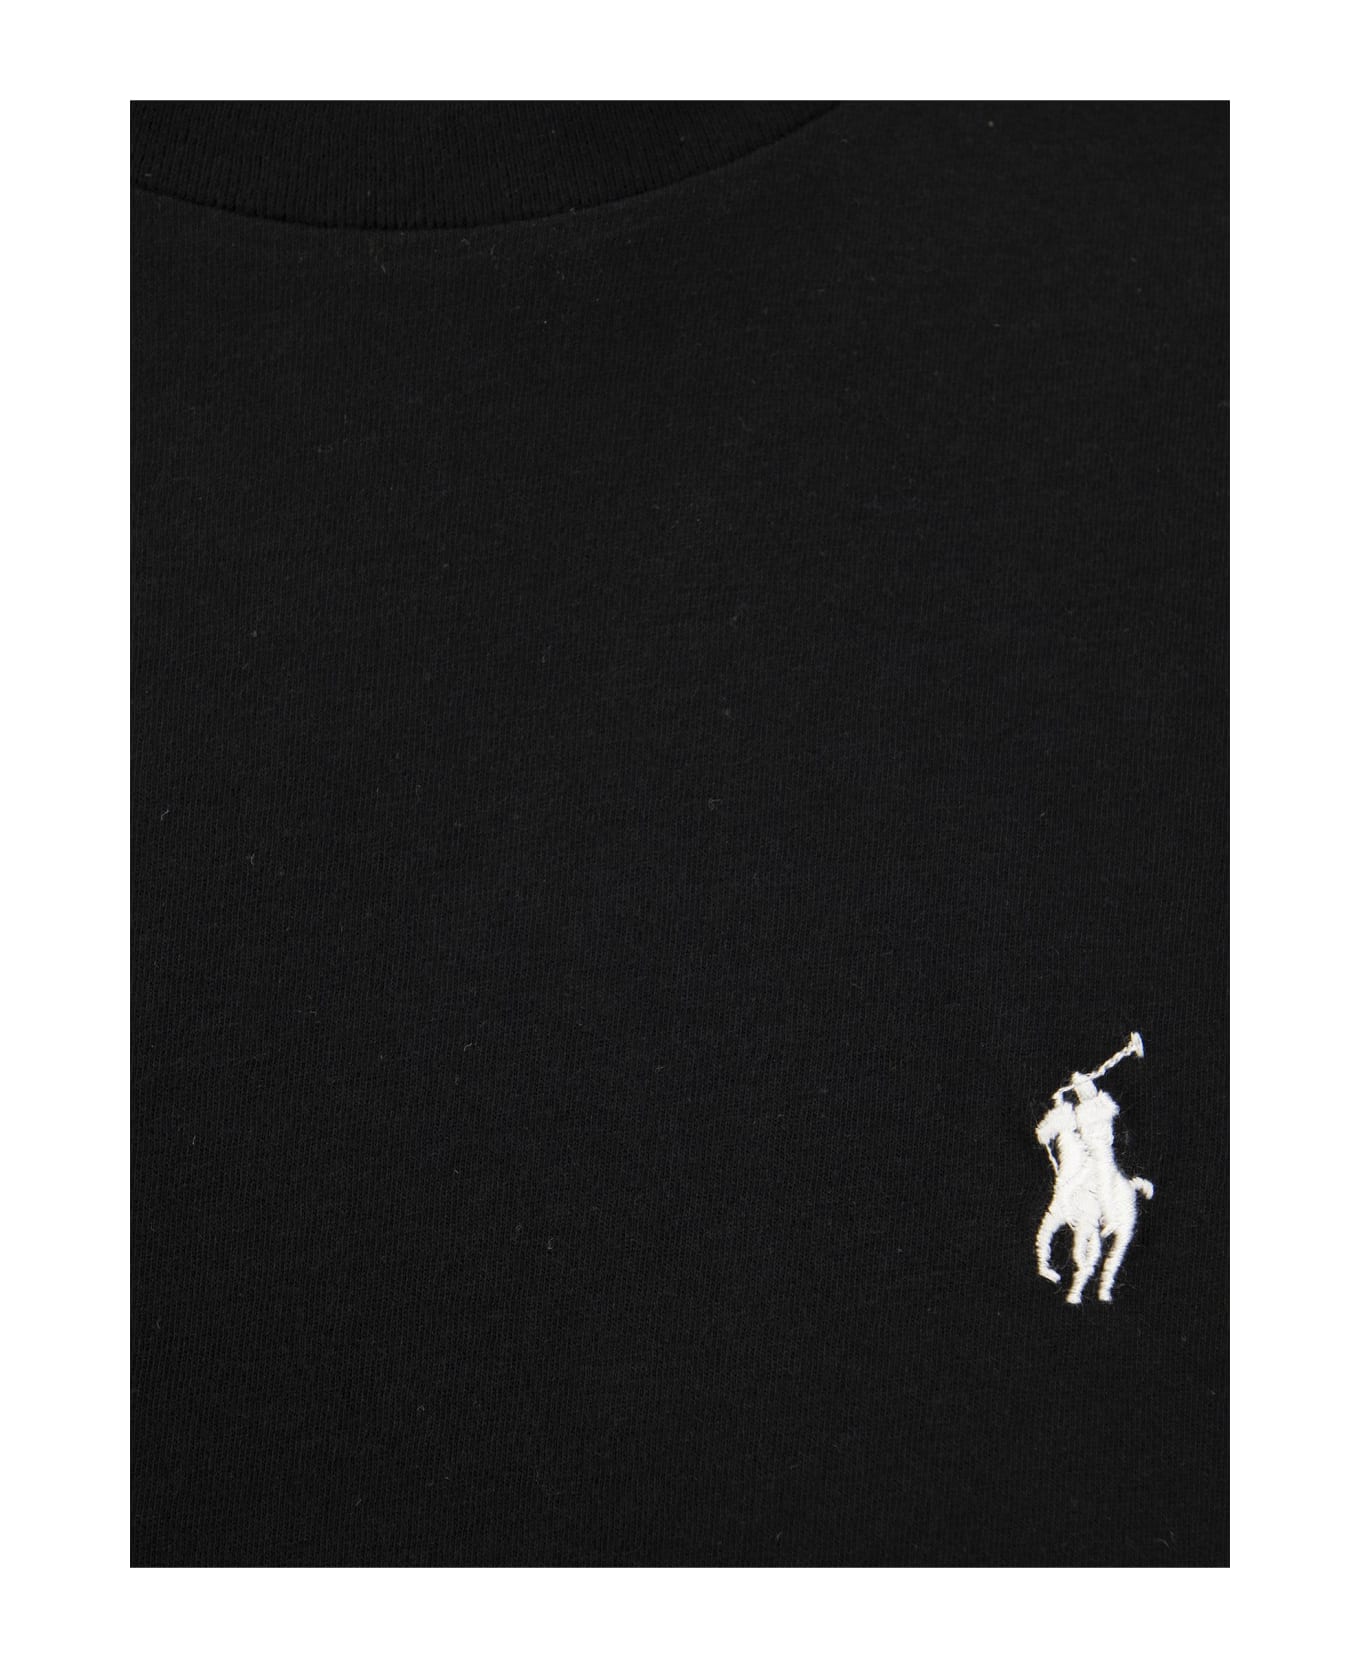 Polo Ralph Lauren Black T-shirt With Contrasting Pony - Black Tシャツ